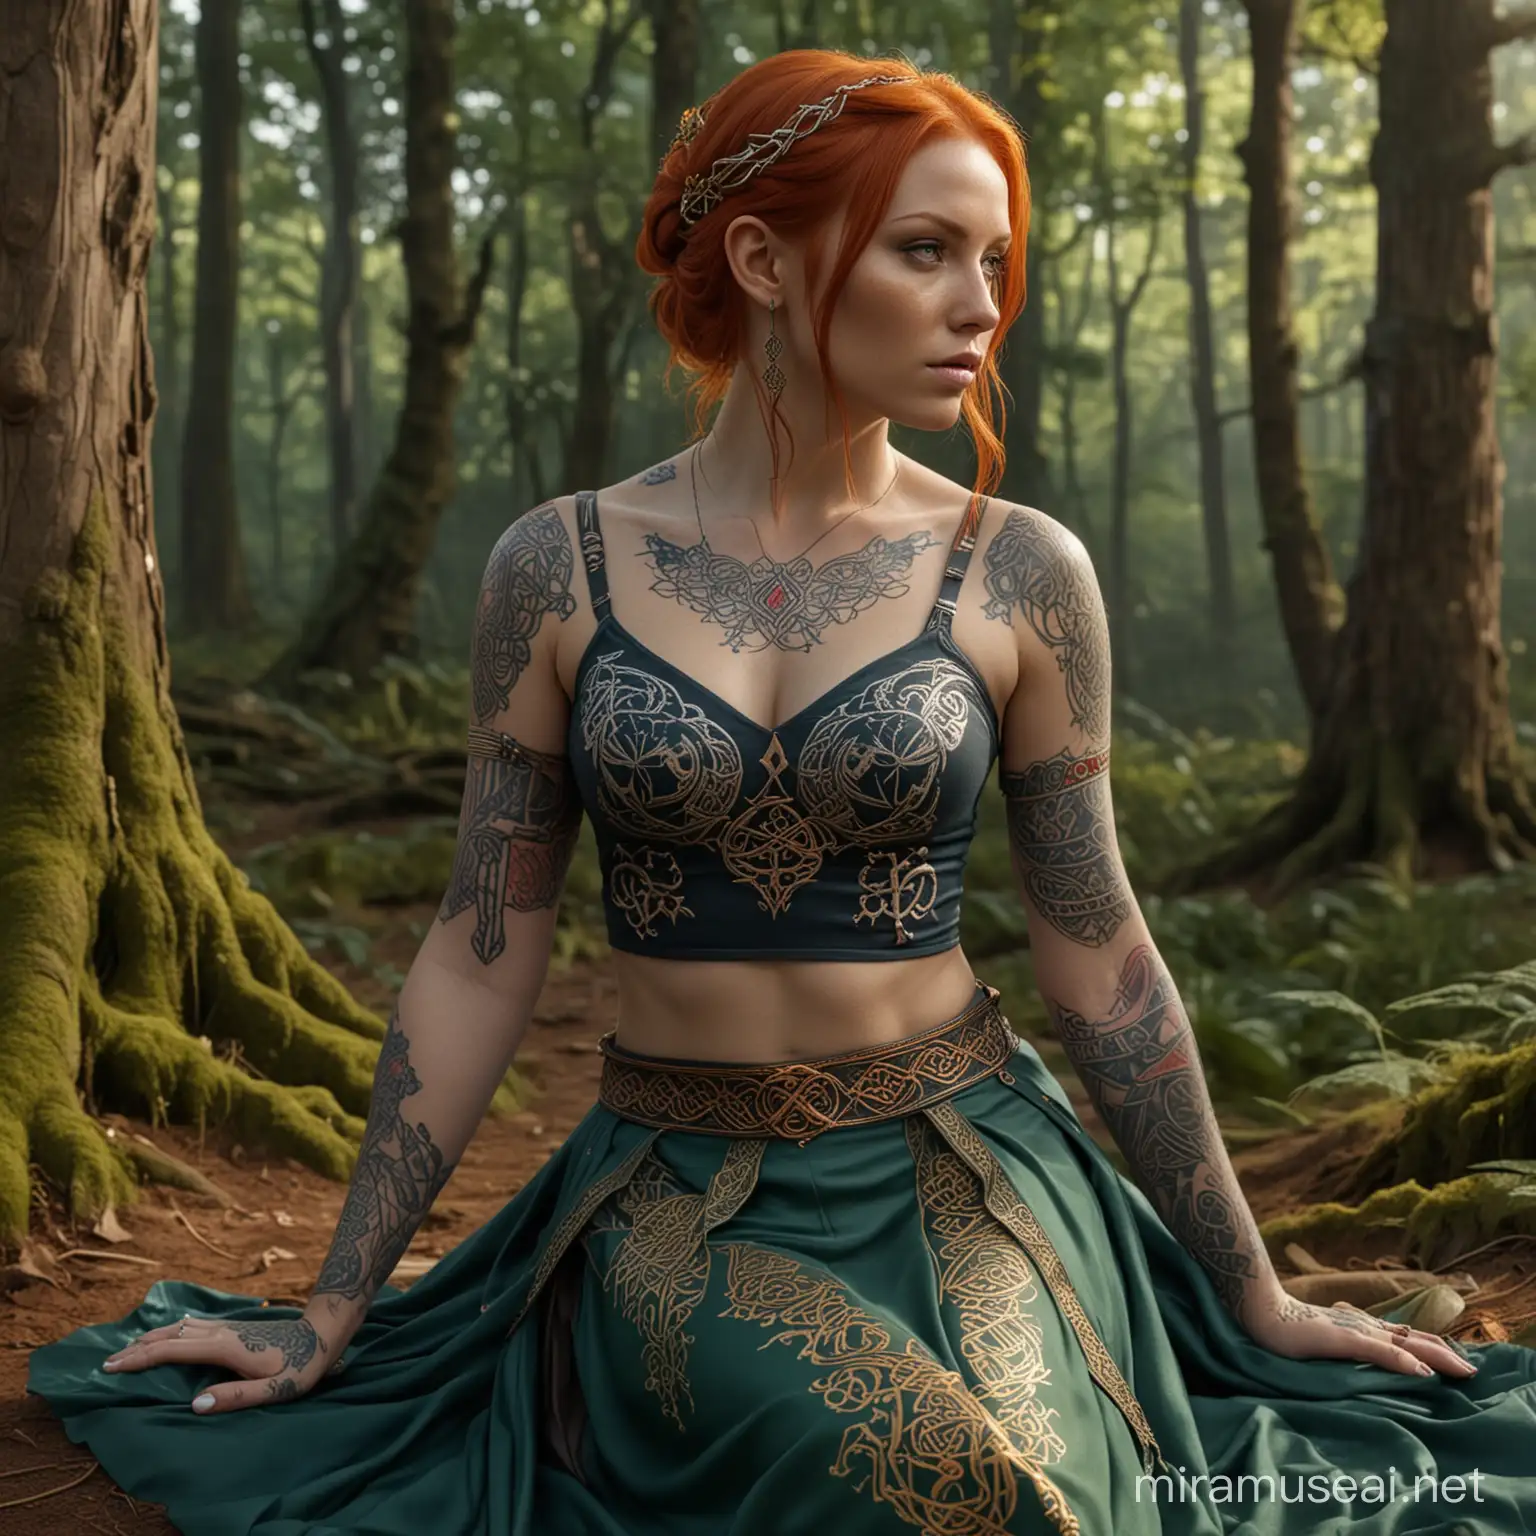 Fiery RedHaired Celtic Woman in Enchanted Forest